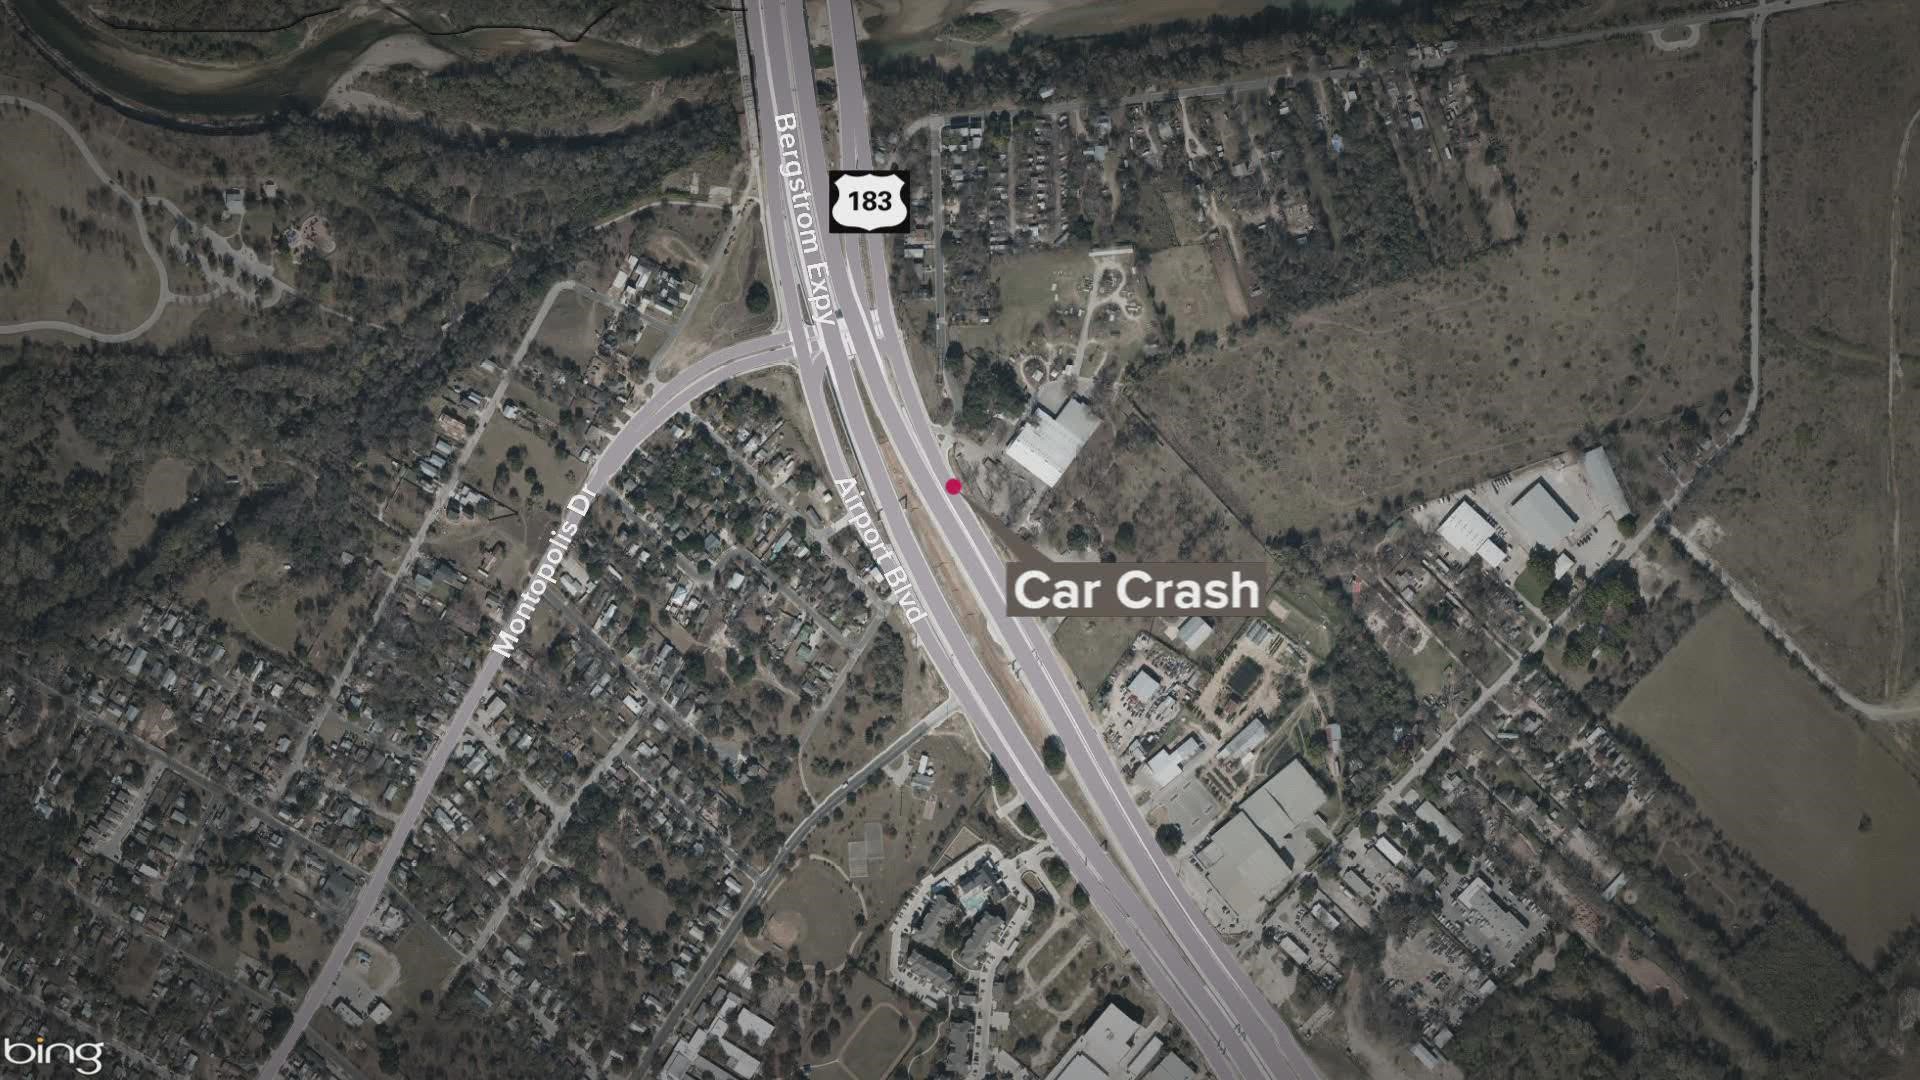 Six adults and two children are in the hospital after a multi-vehicle crash on Bastrop Highway in southeast Austin.